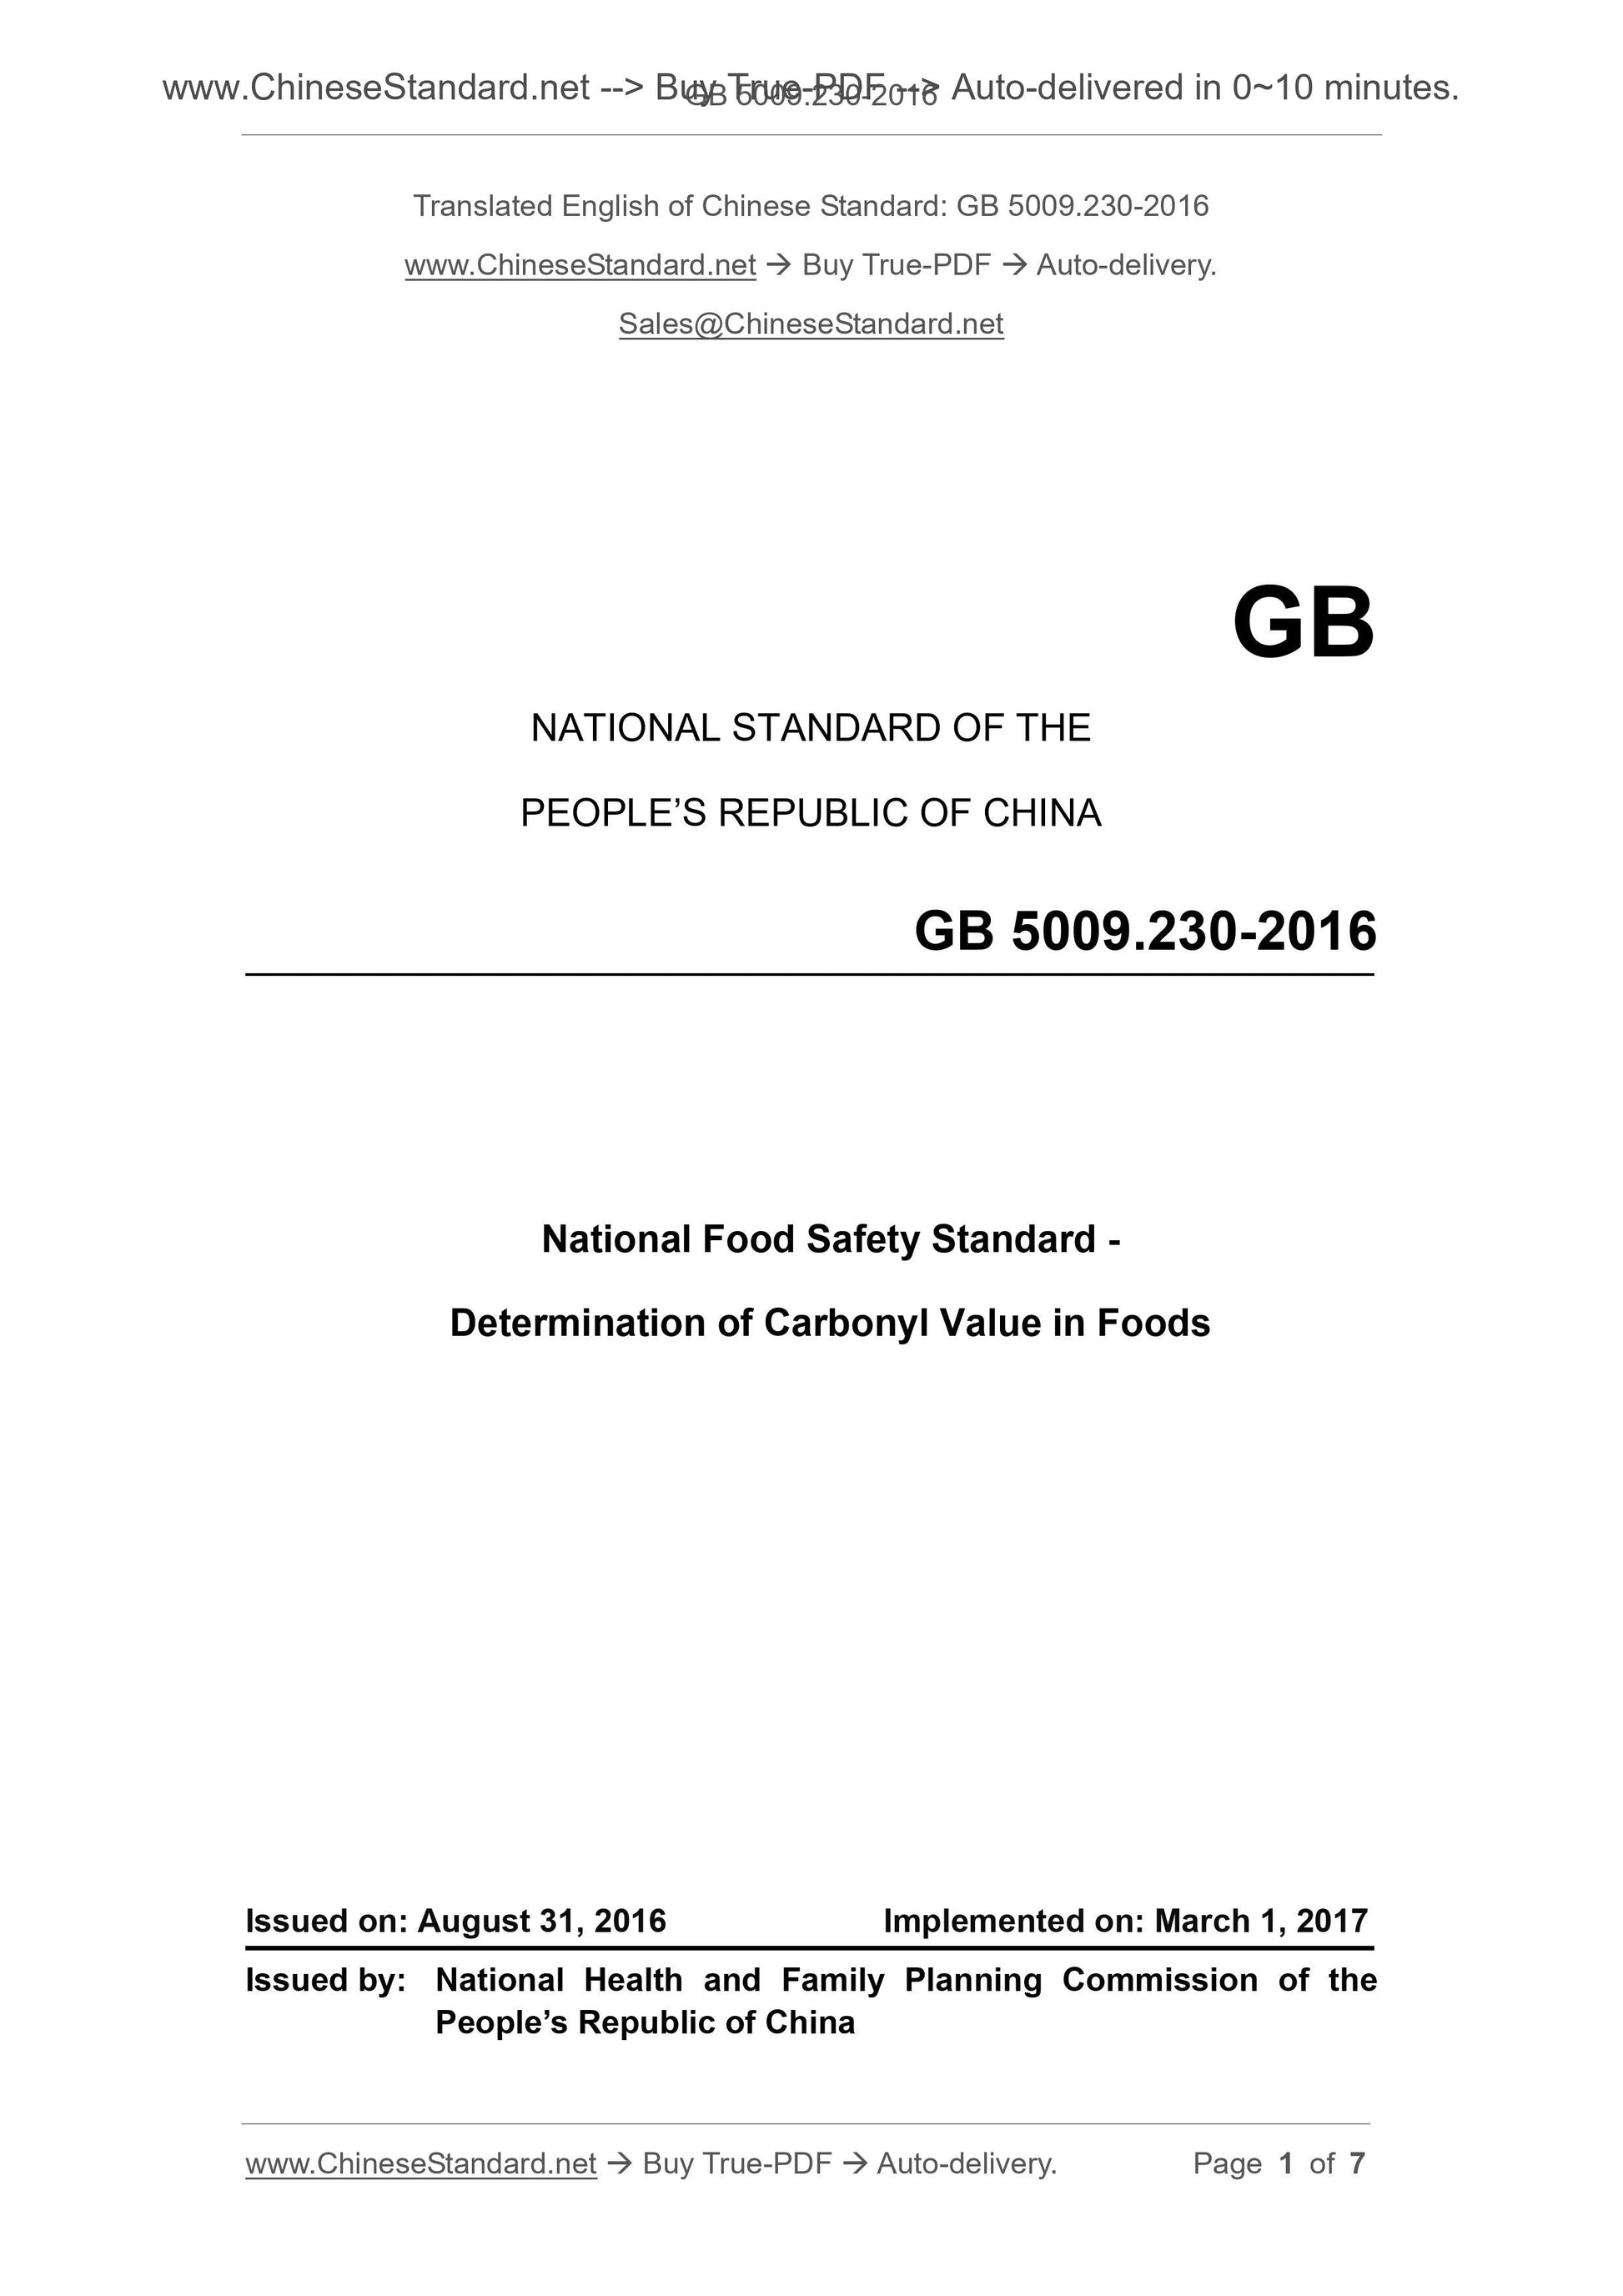 GB 5009.230-2016 Page 1